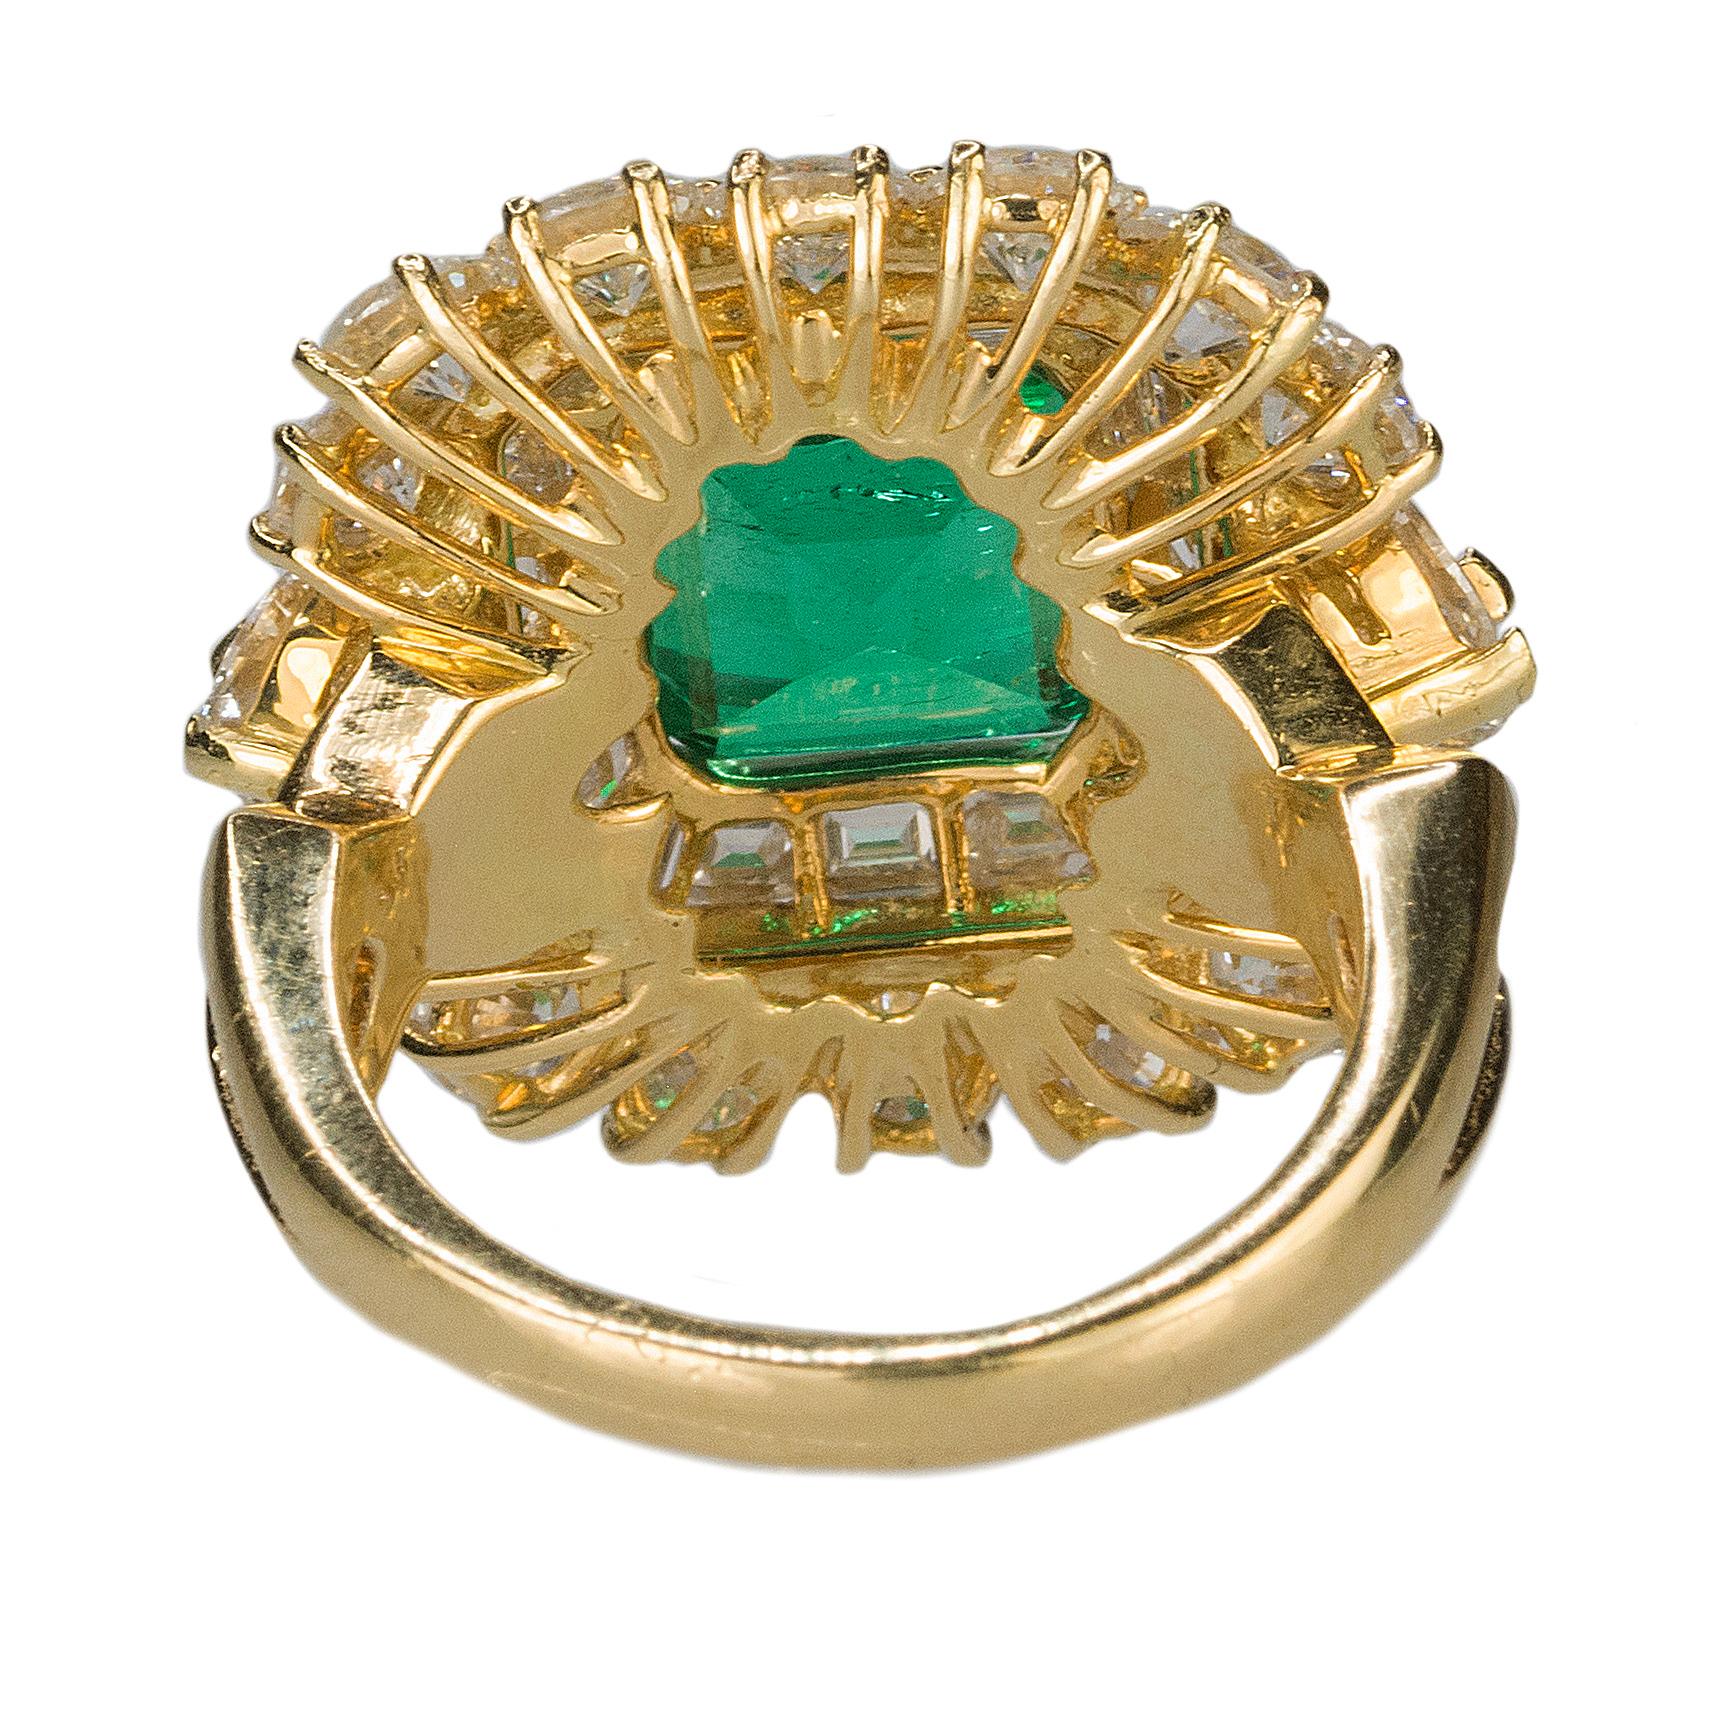 Magnificent 6.25 Carat Colombian Emerald Diamond Ring 2